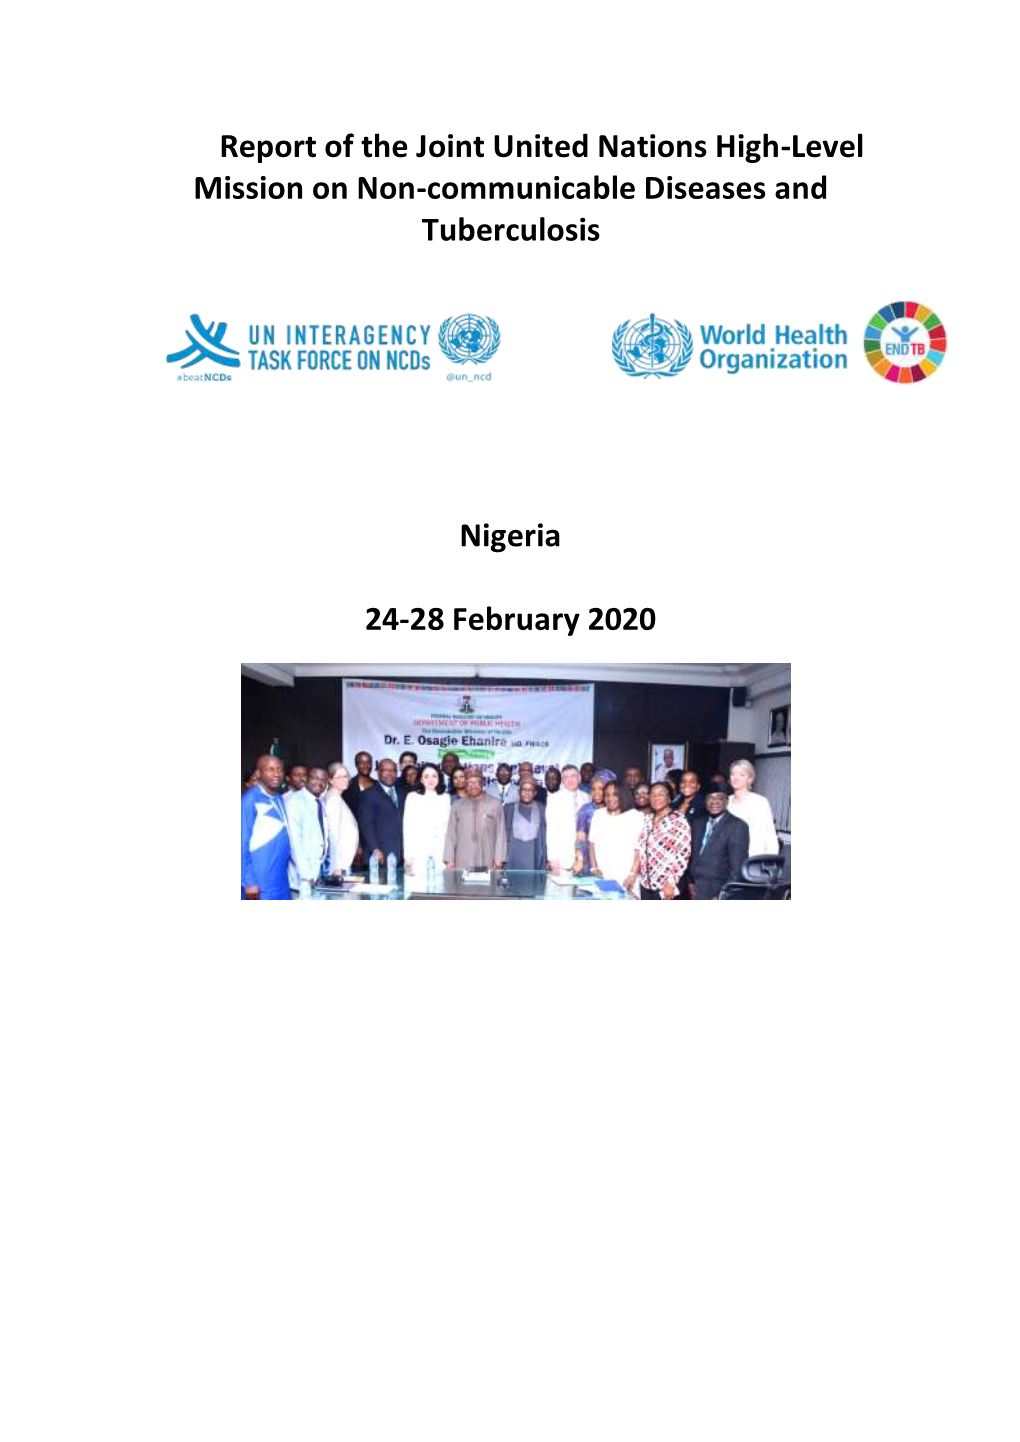 Report of the Joint United Nations High-Level Mission on Non-Communicable Diseases and Tuberculosis